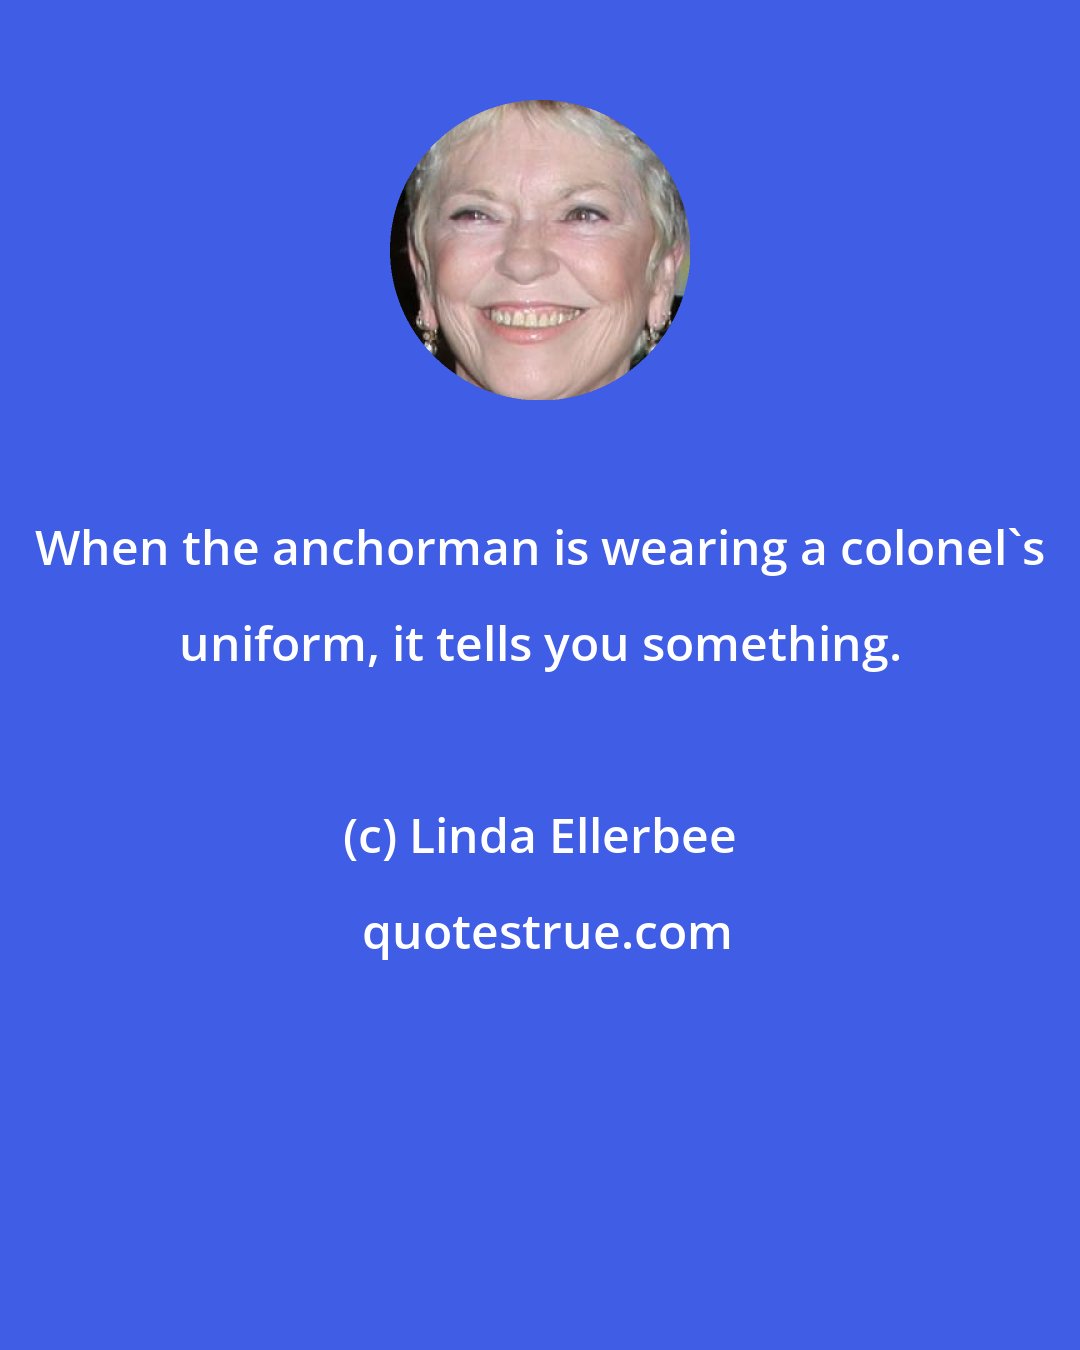 Linda Ellerbee: When the anchorman is wearing a colonel's uniform, it tells you something.